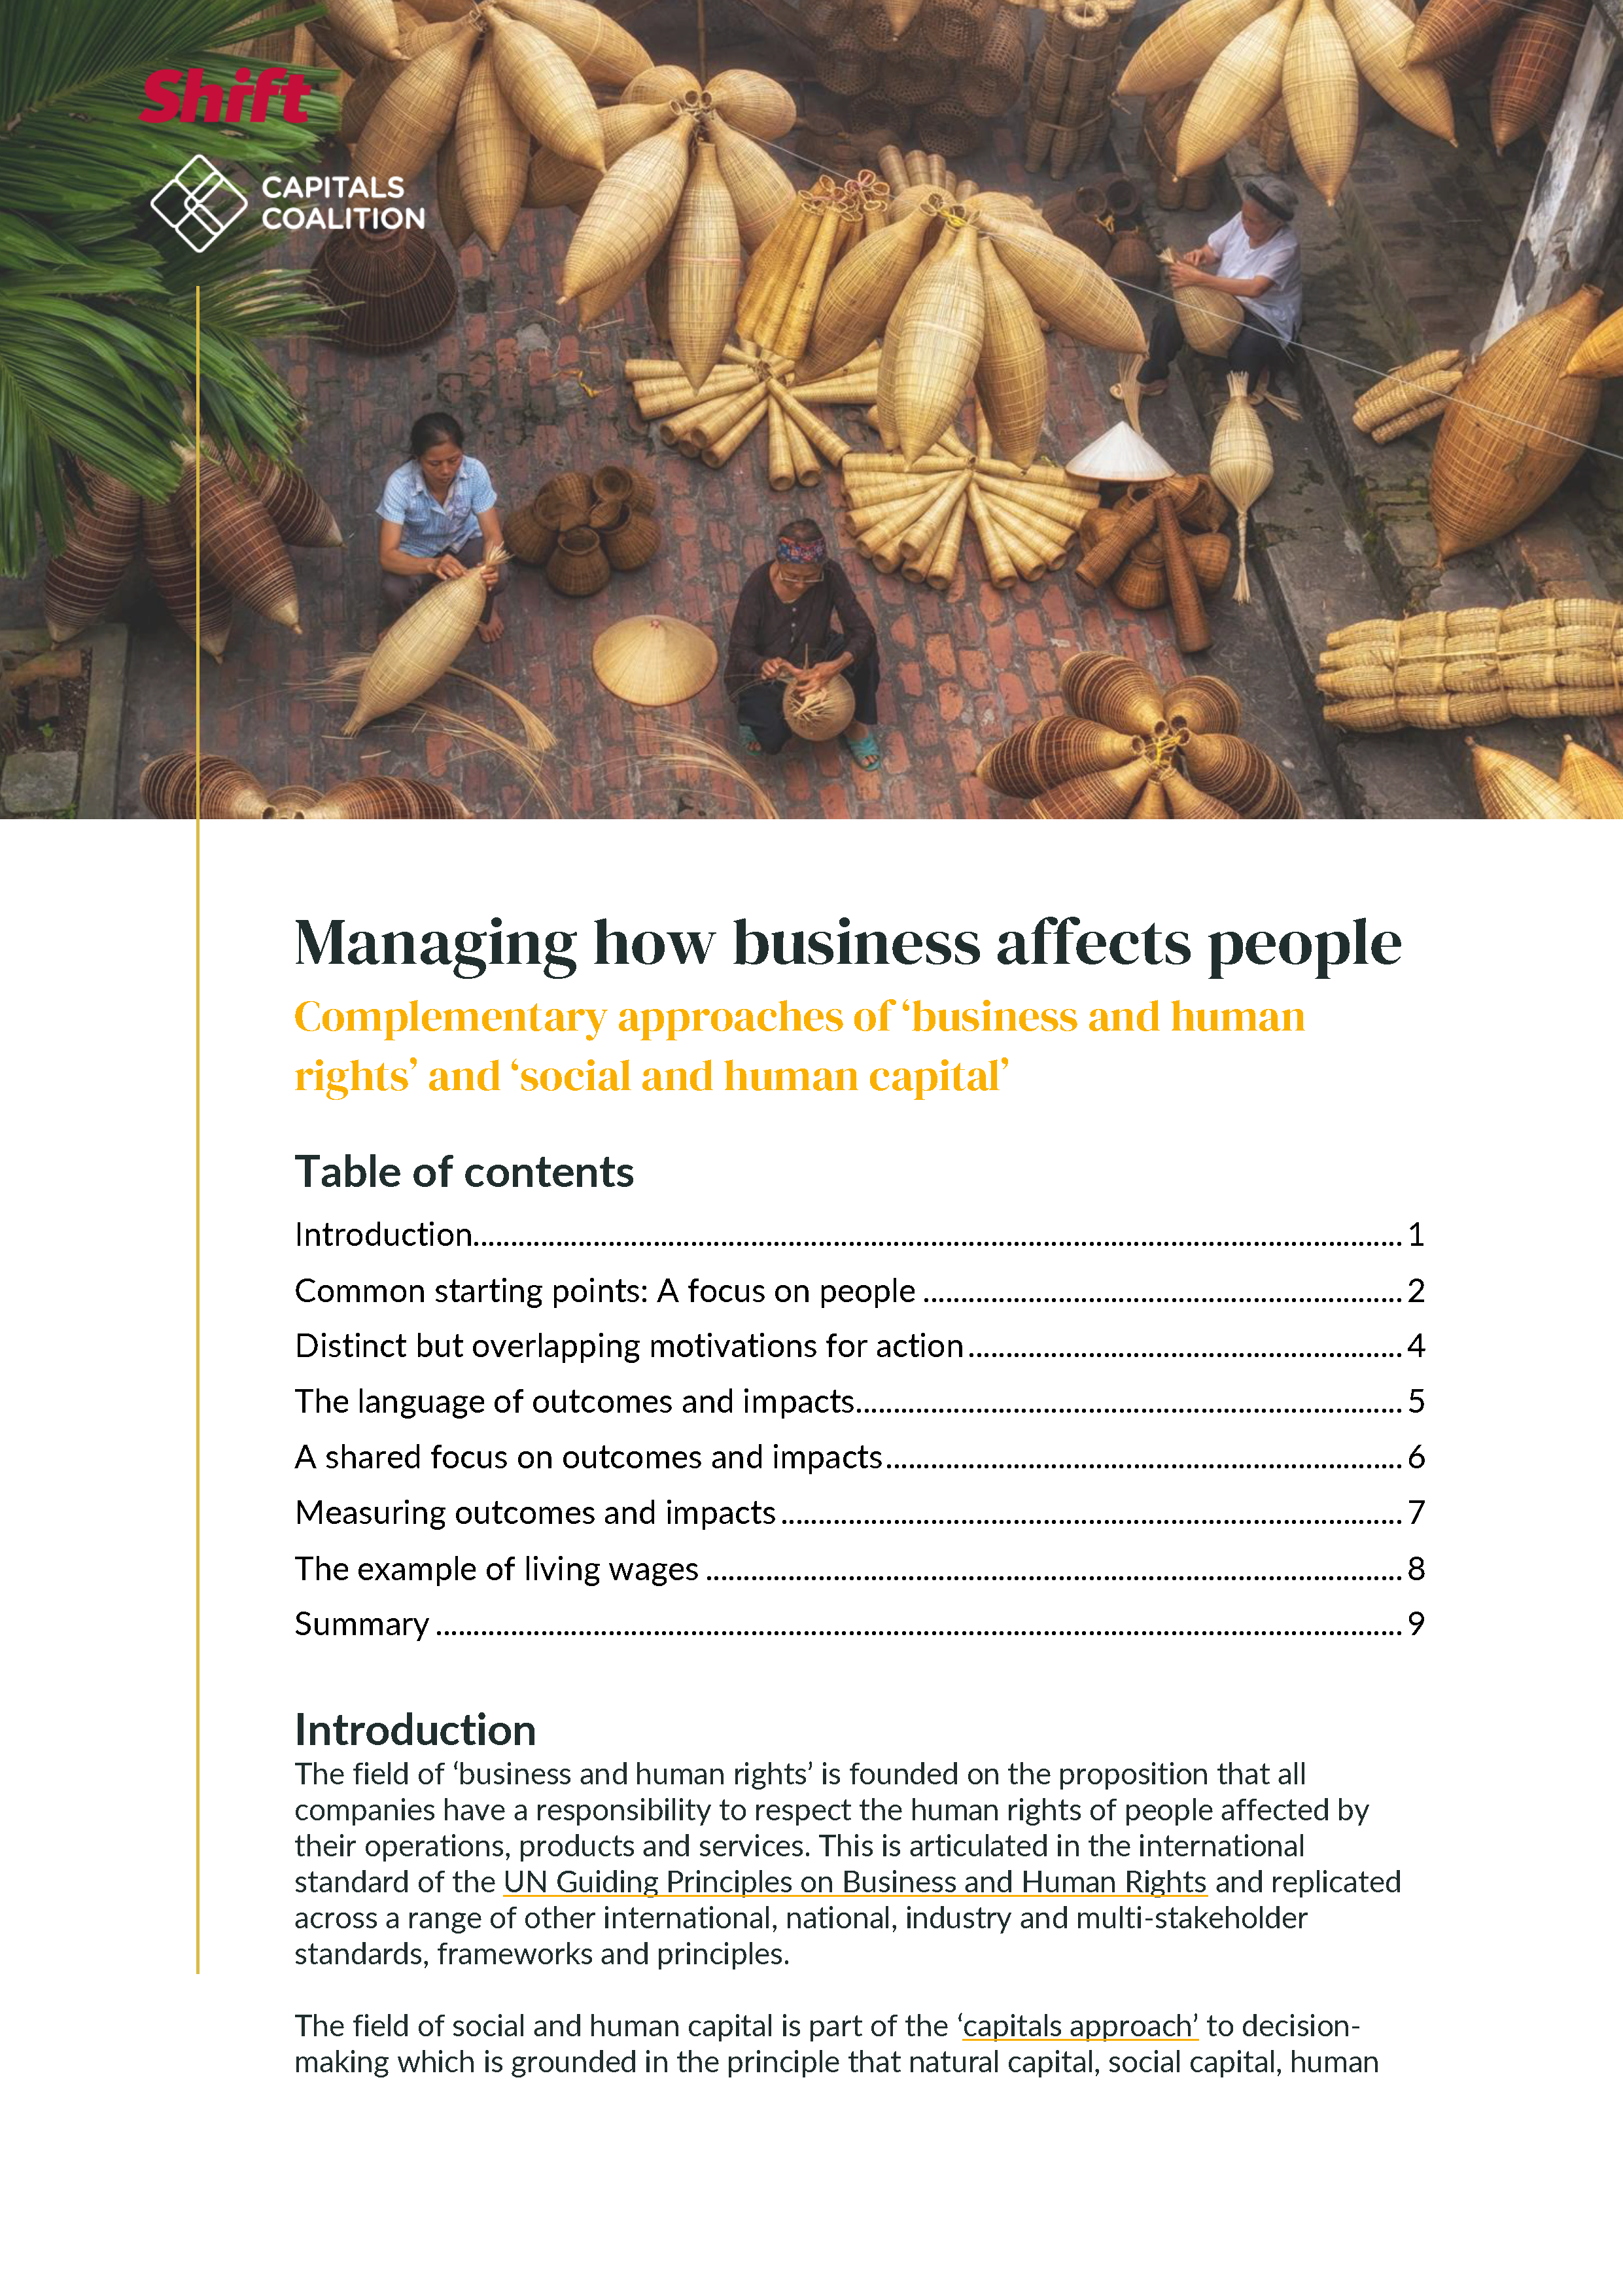 Understanding business impacts on people: the complementary approaches of ‘business and human rights’ and ‘social and human capital’